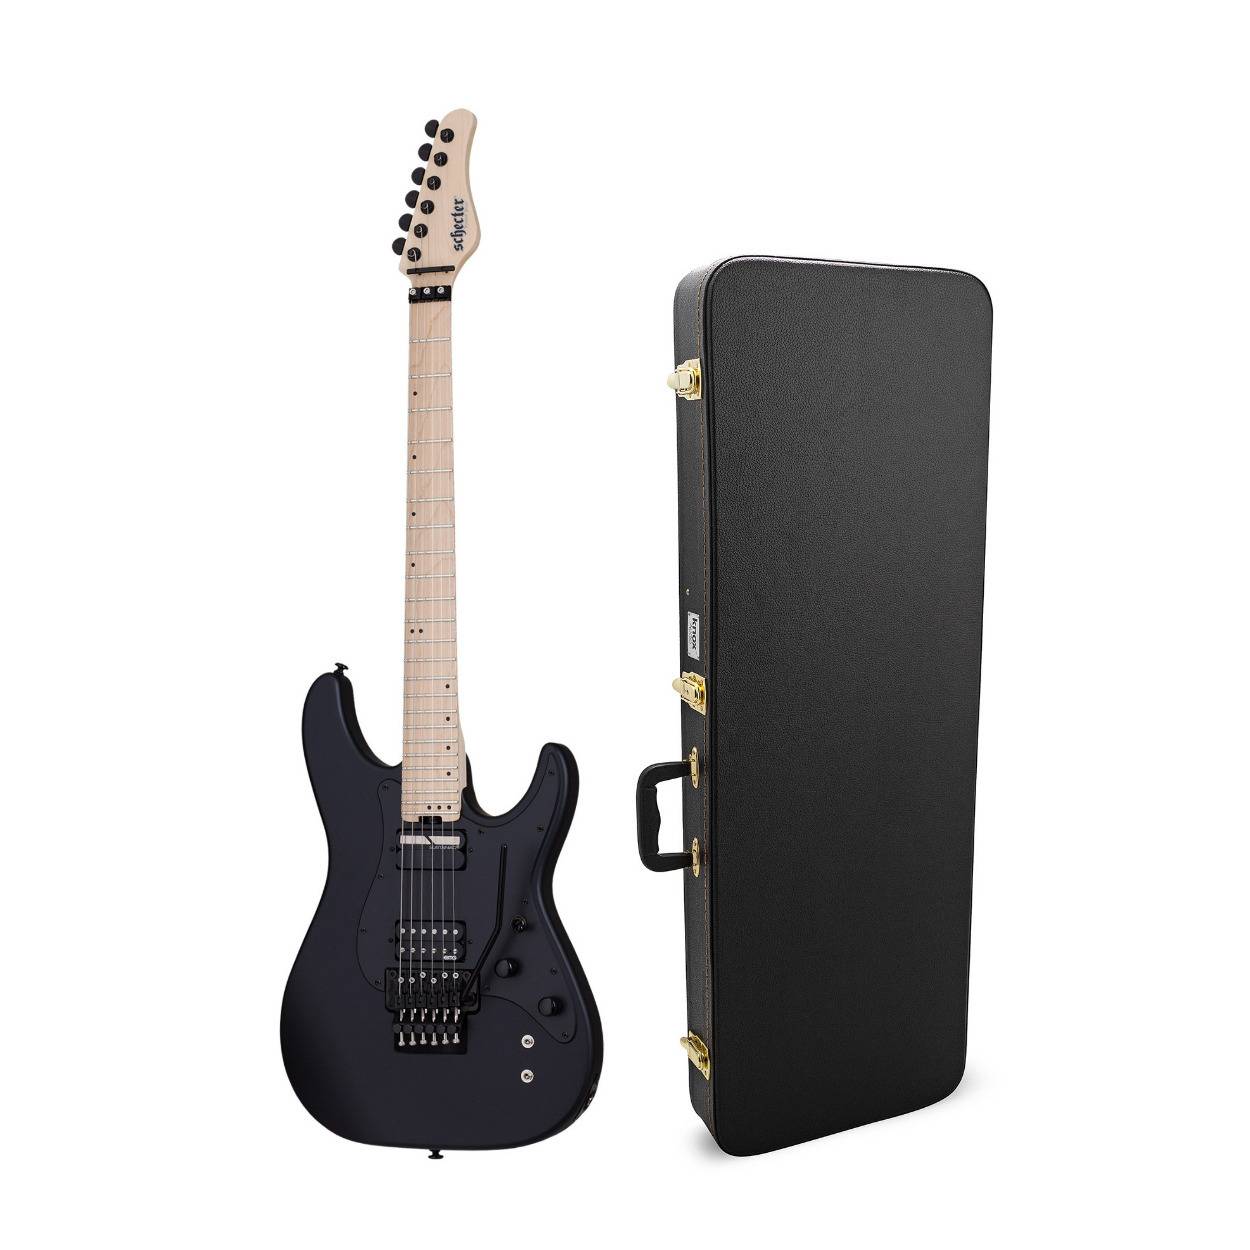 Schecter Sun Valley Super Shredder FR S 6-String Electric Guitar with Hard-shell Carrying Case